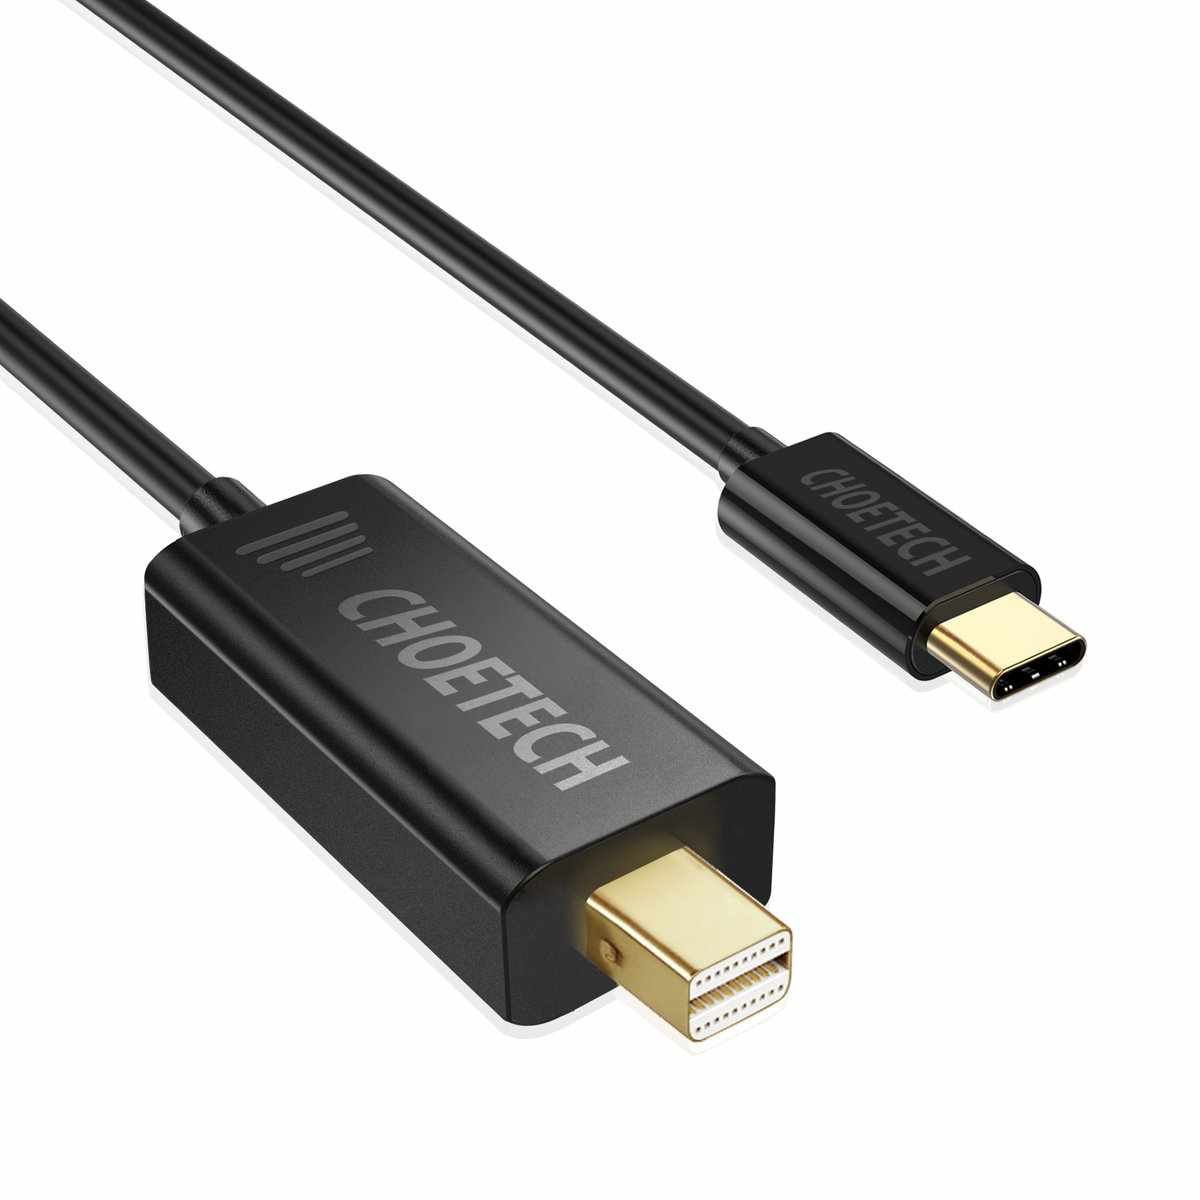 CHOETECH USB C to Mini DisplayPort Cable (1.5m) CHOETECH OFFICIAL